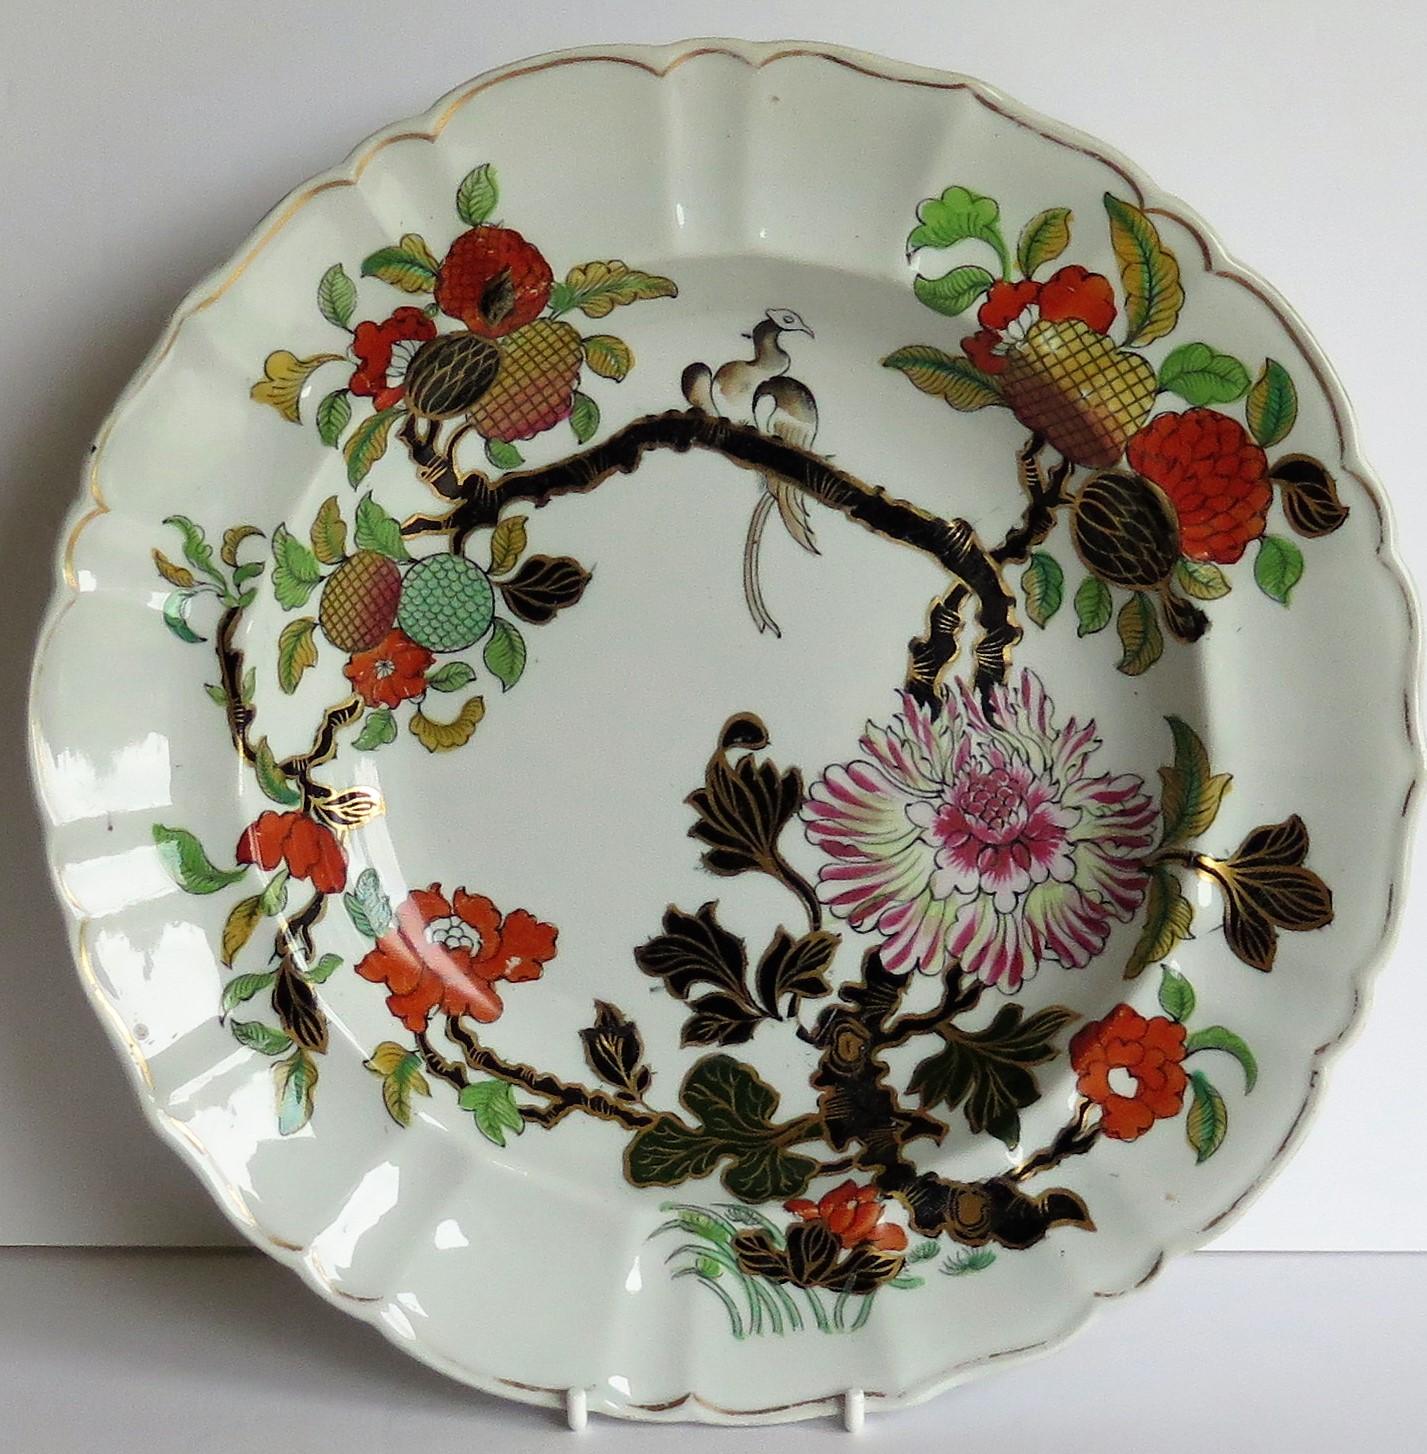 This is a very attractive large soup bowl or plate made by the Mason's Patent Ironstone China, England in the early part of the 19th century, circa 1830.

This soup bowl or plate is decorated in the 